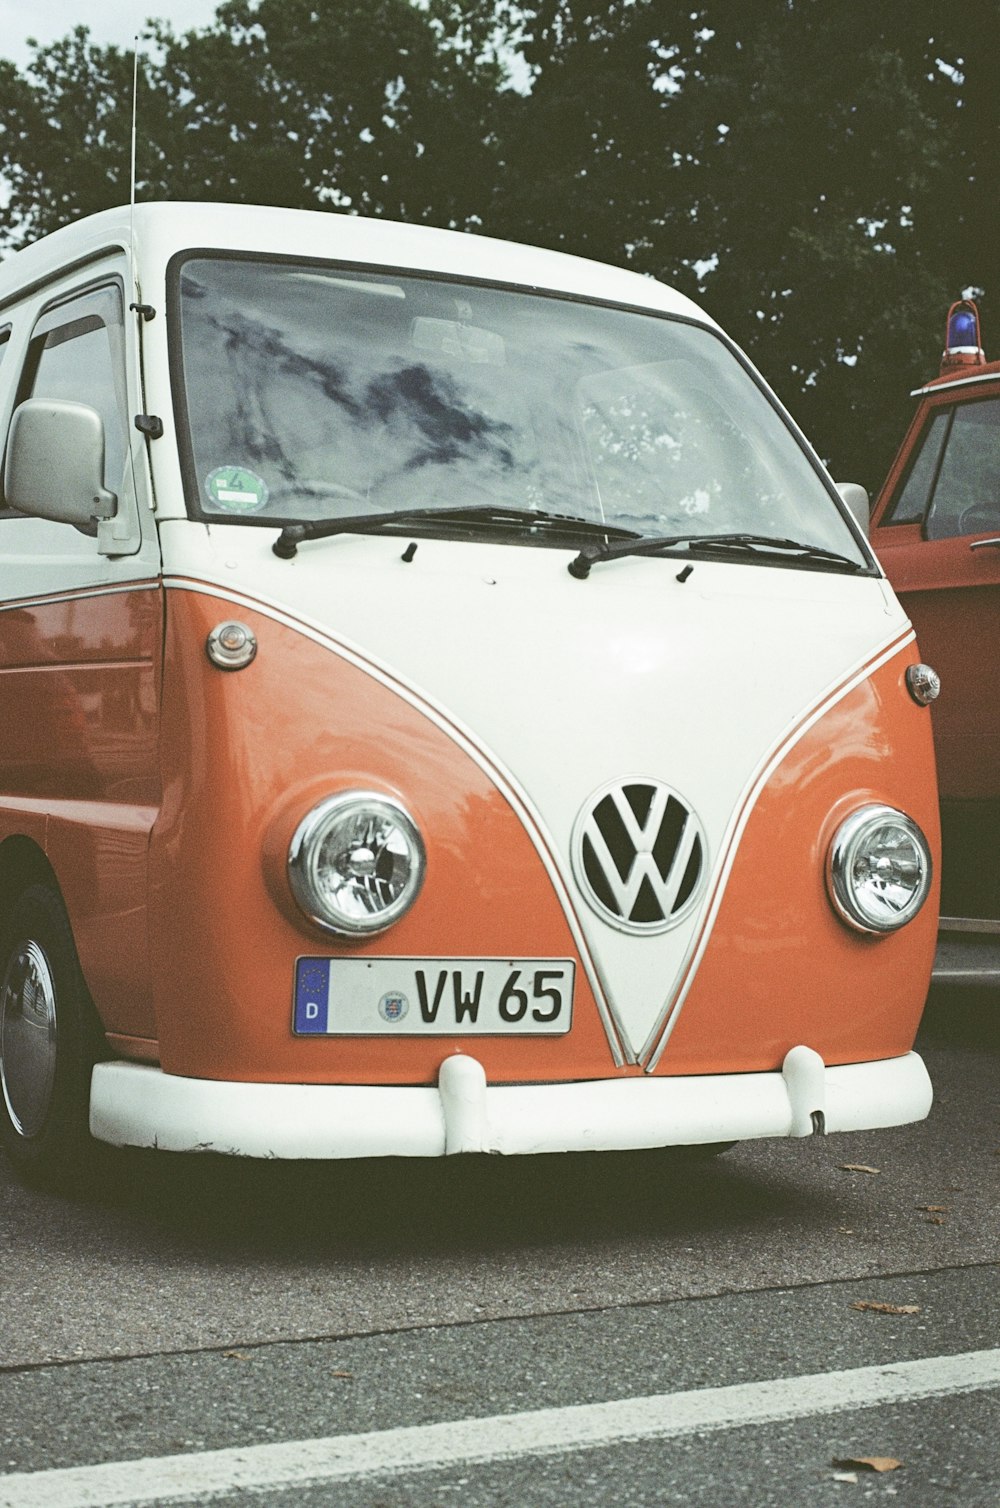 an orange and white vw bus parked next to a red car